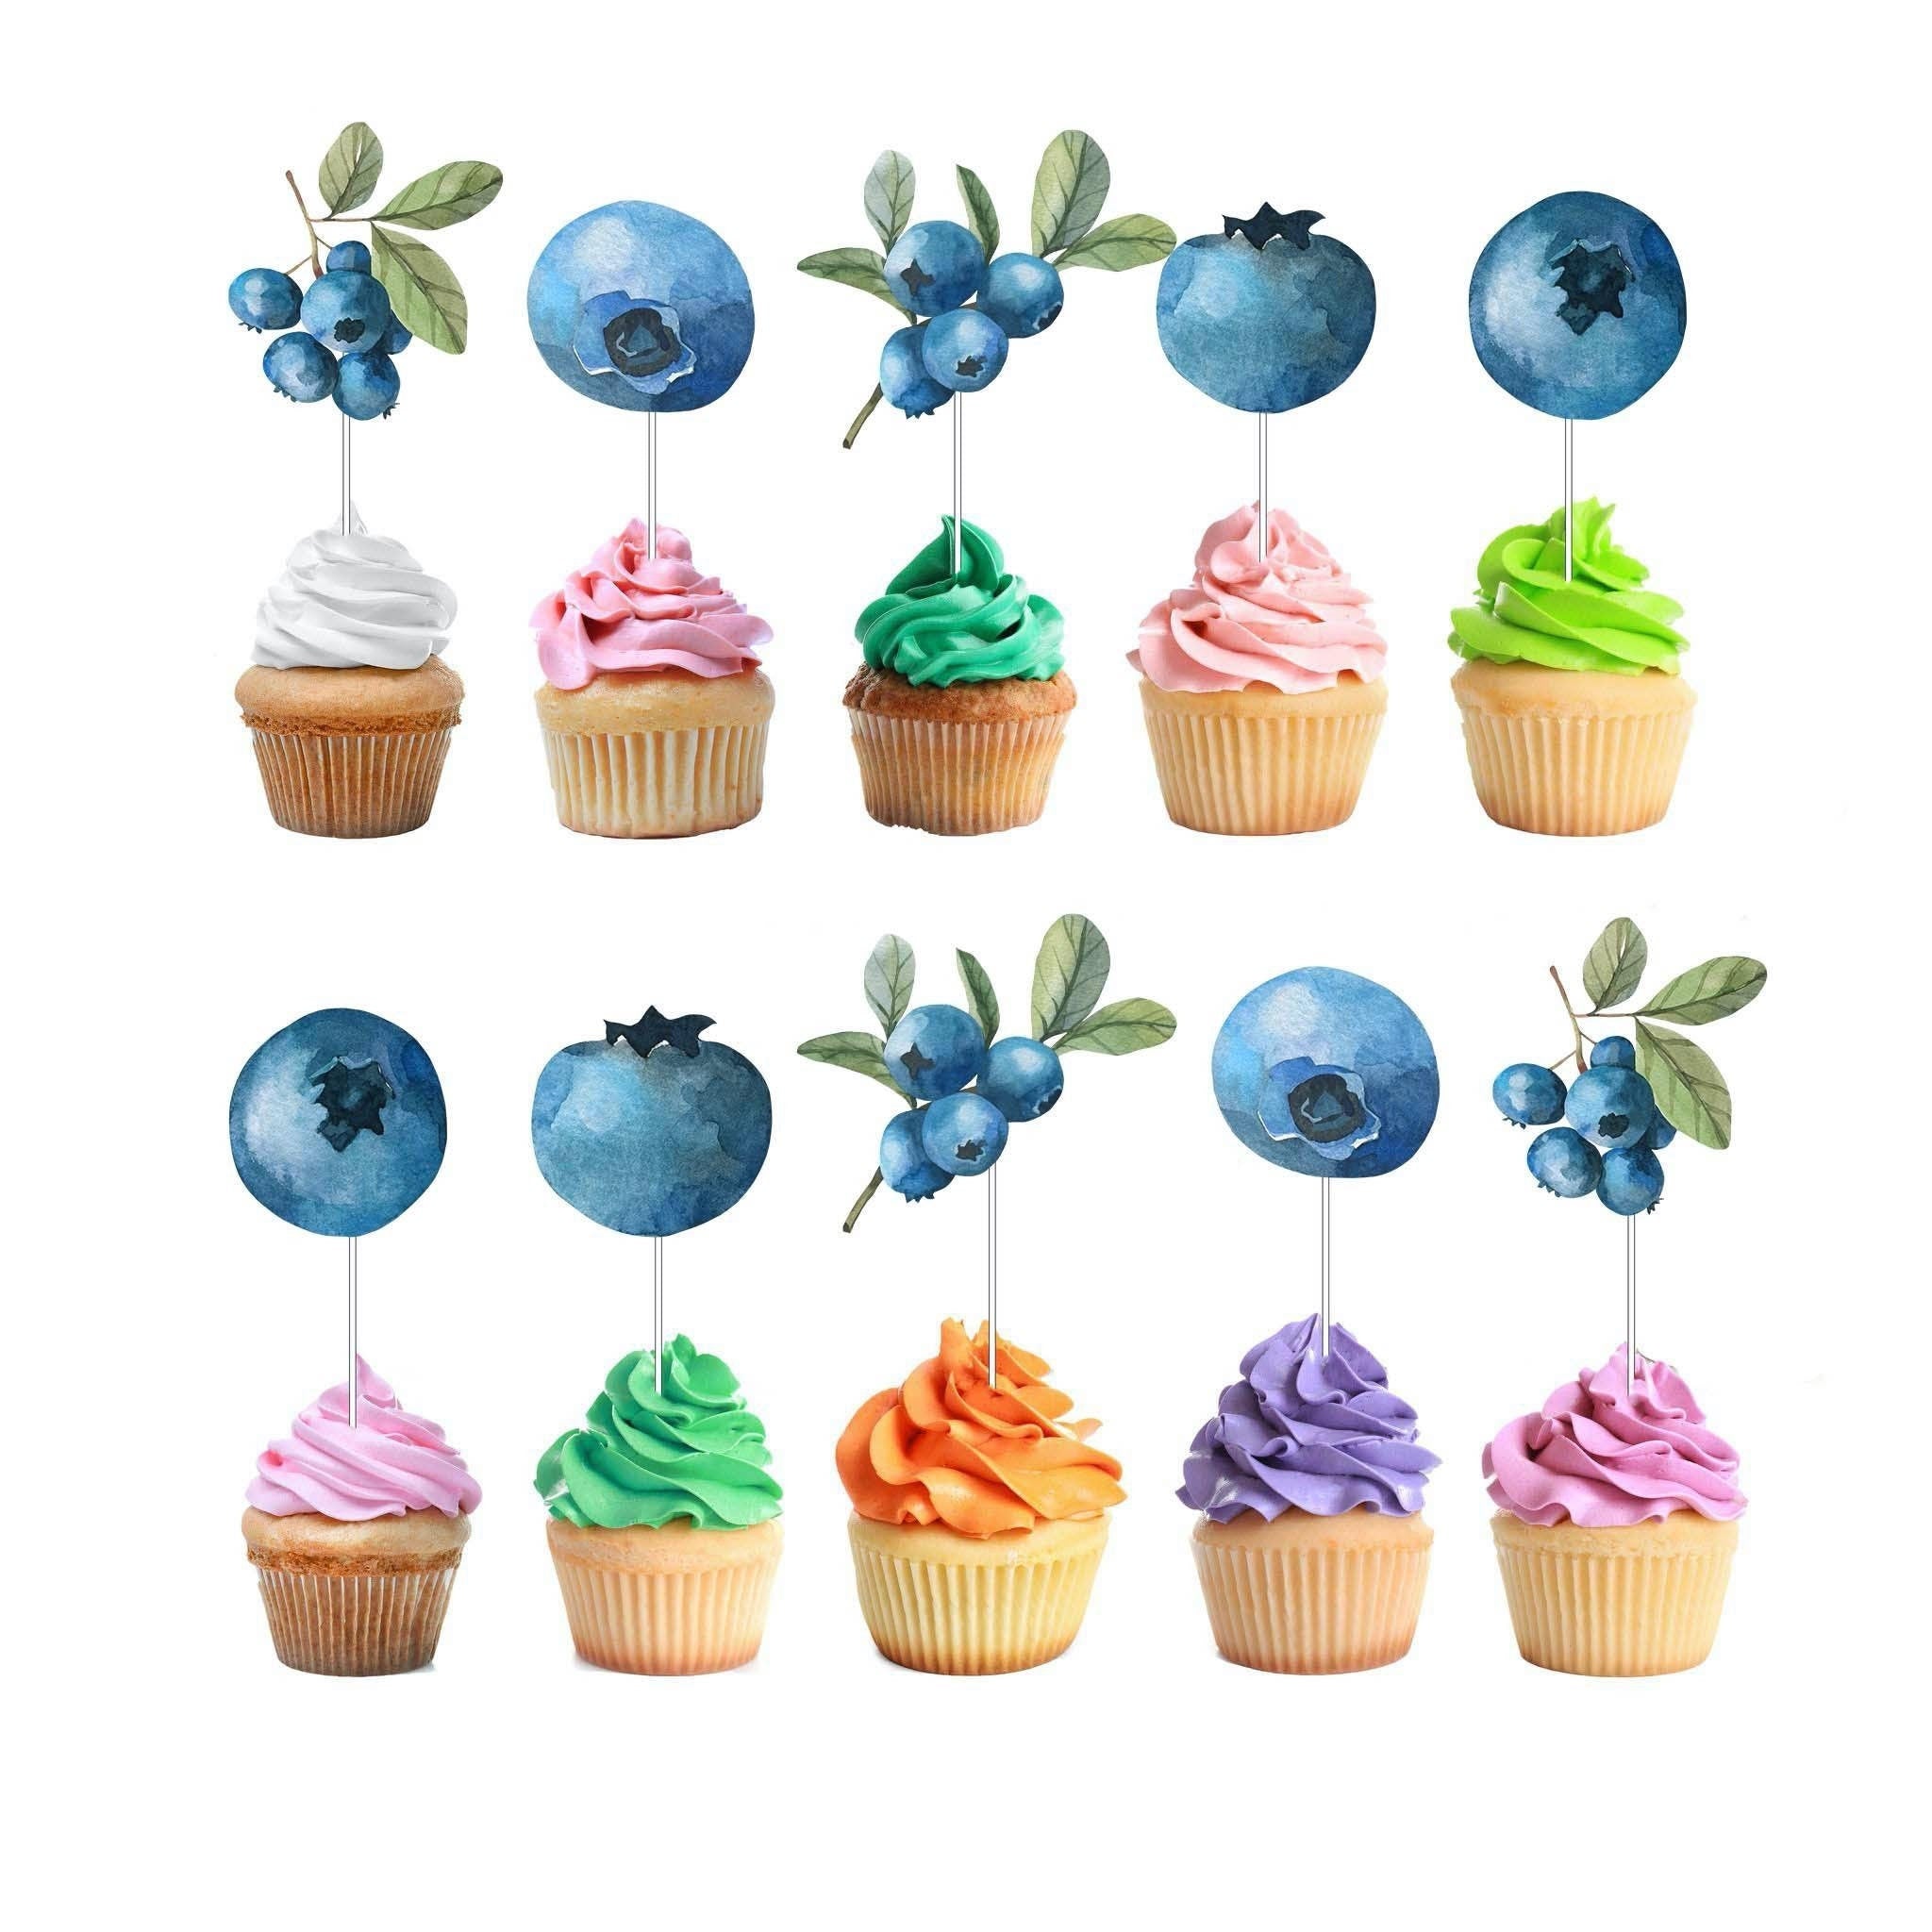 Sweet Blueberry Cupcake Toppers - Add a Berry Special Touch to Your Treats!